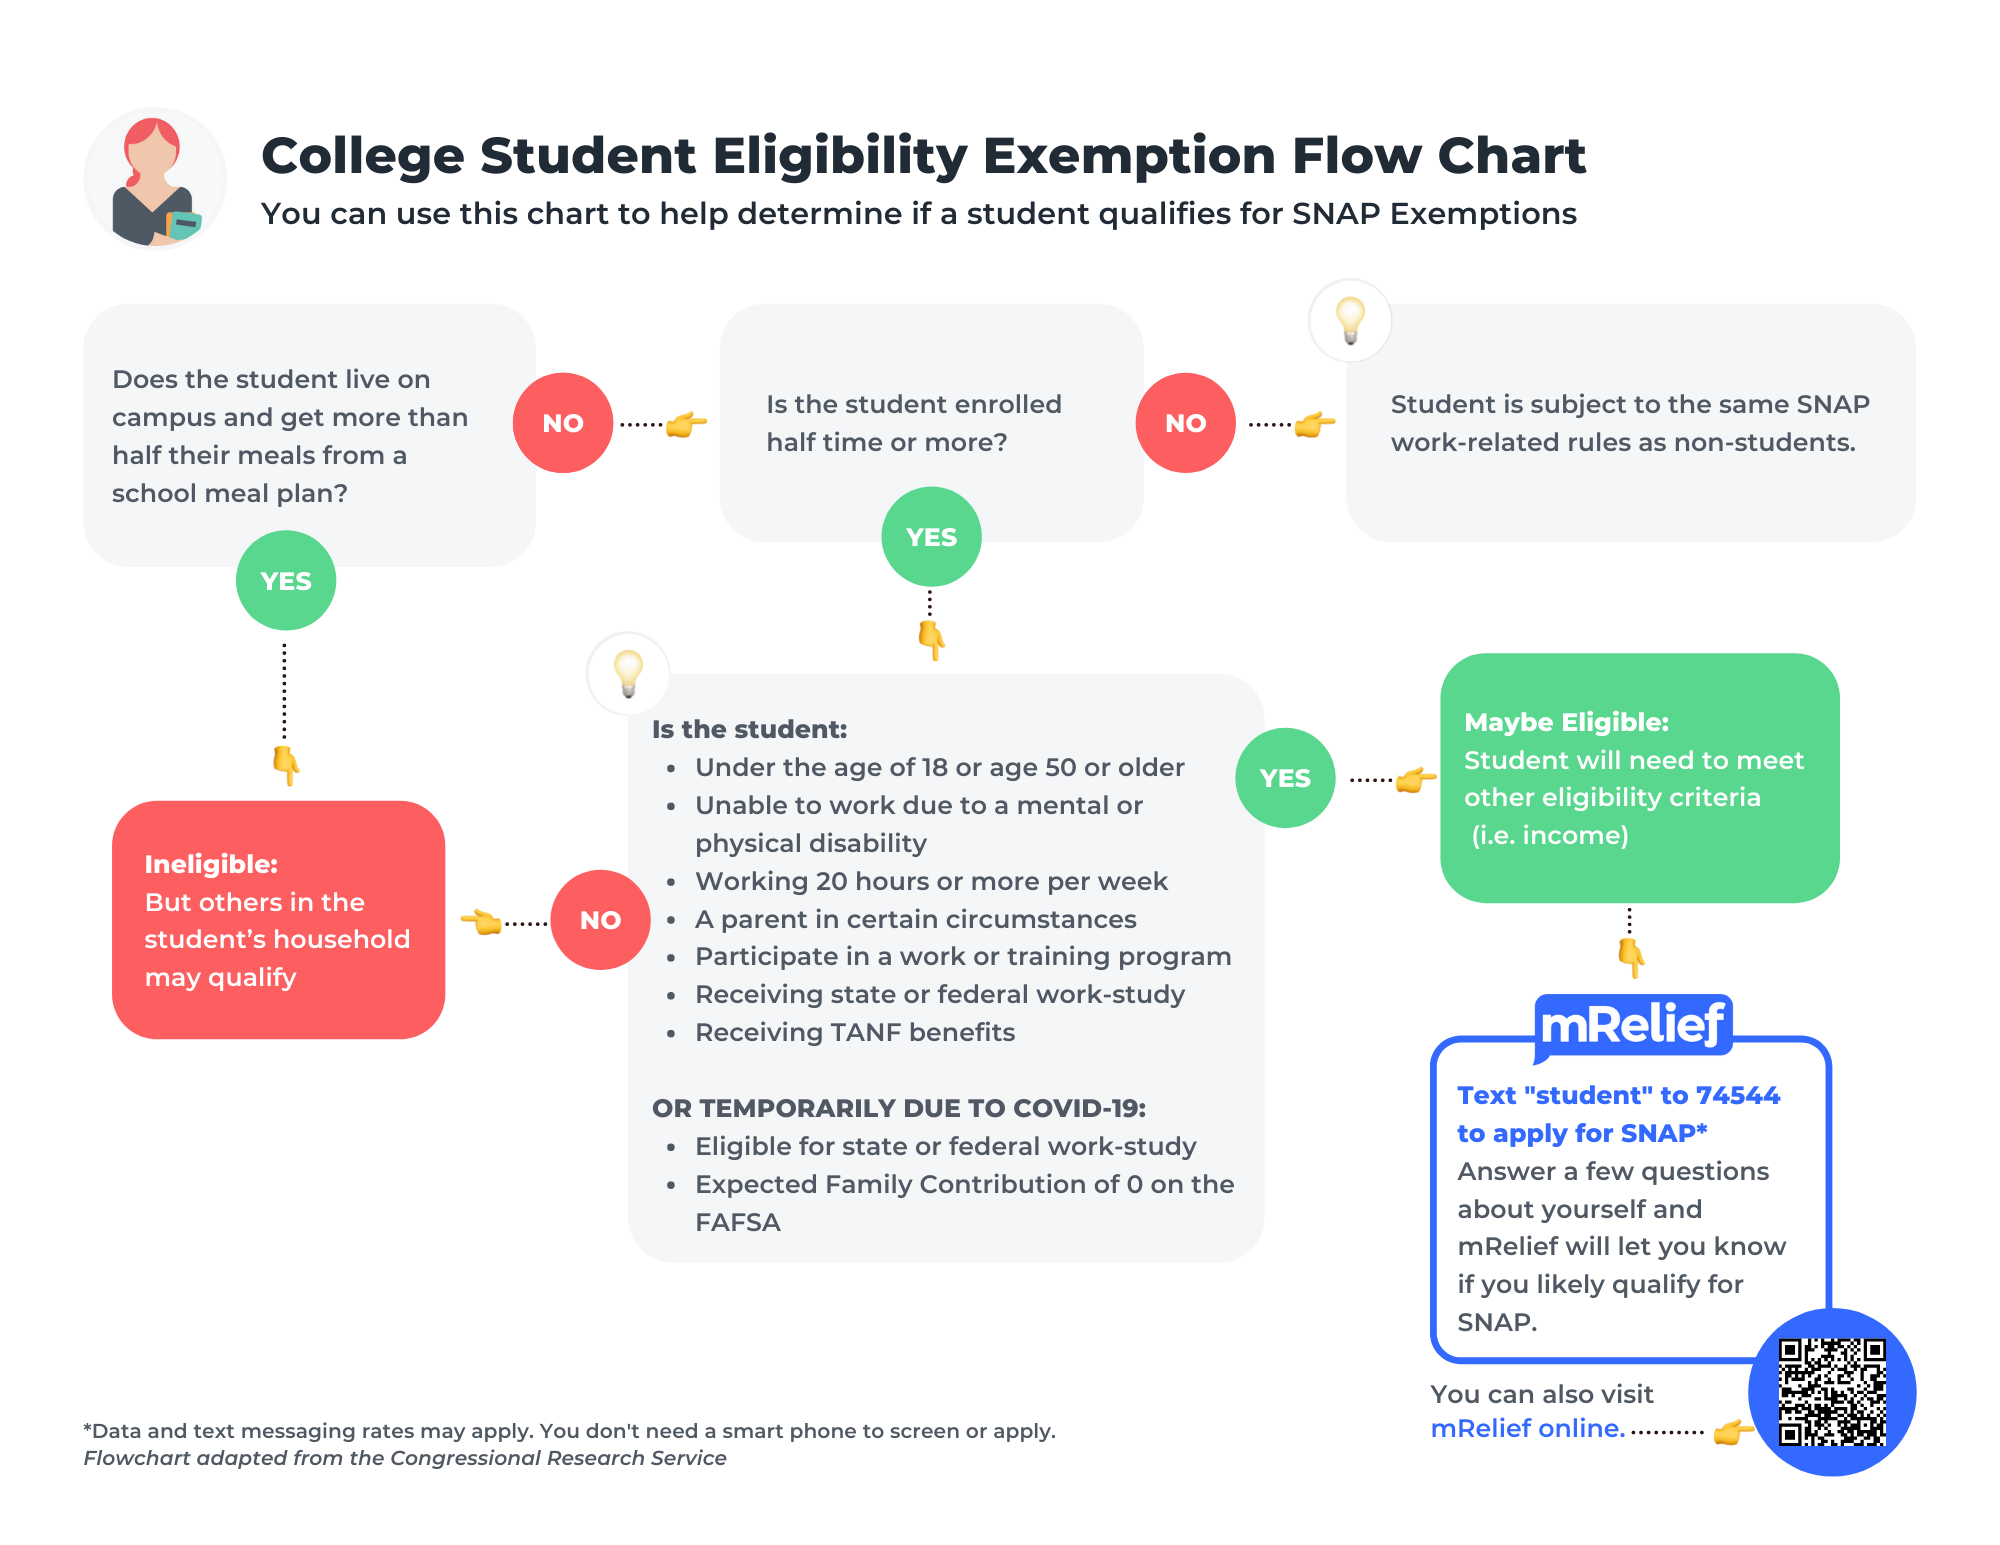 Only 18 of eligible college students participate in SNAP